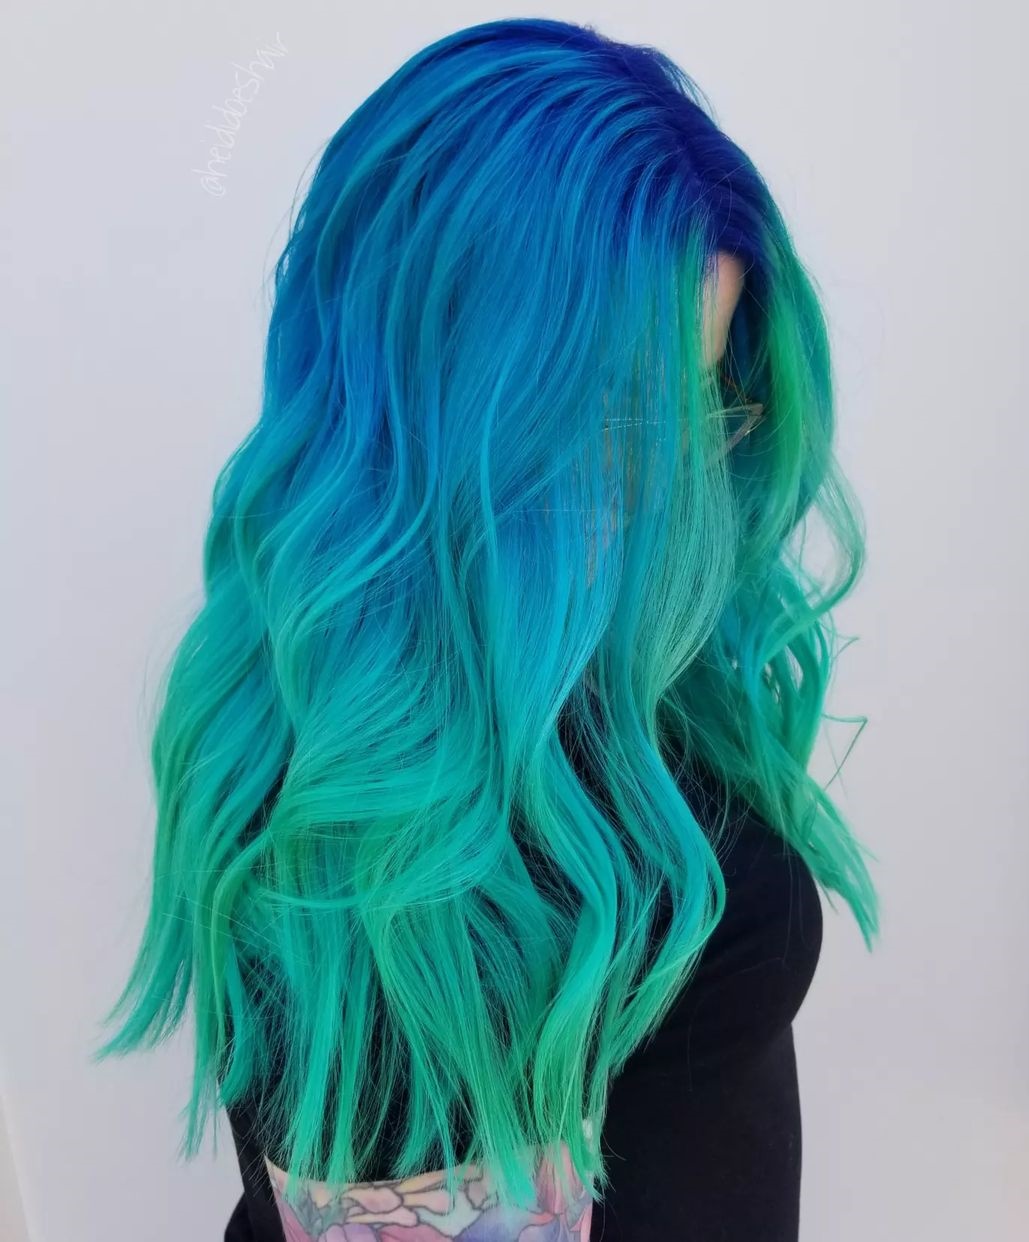 Blue to Green Galaxy Ombre Hair